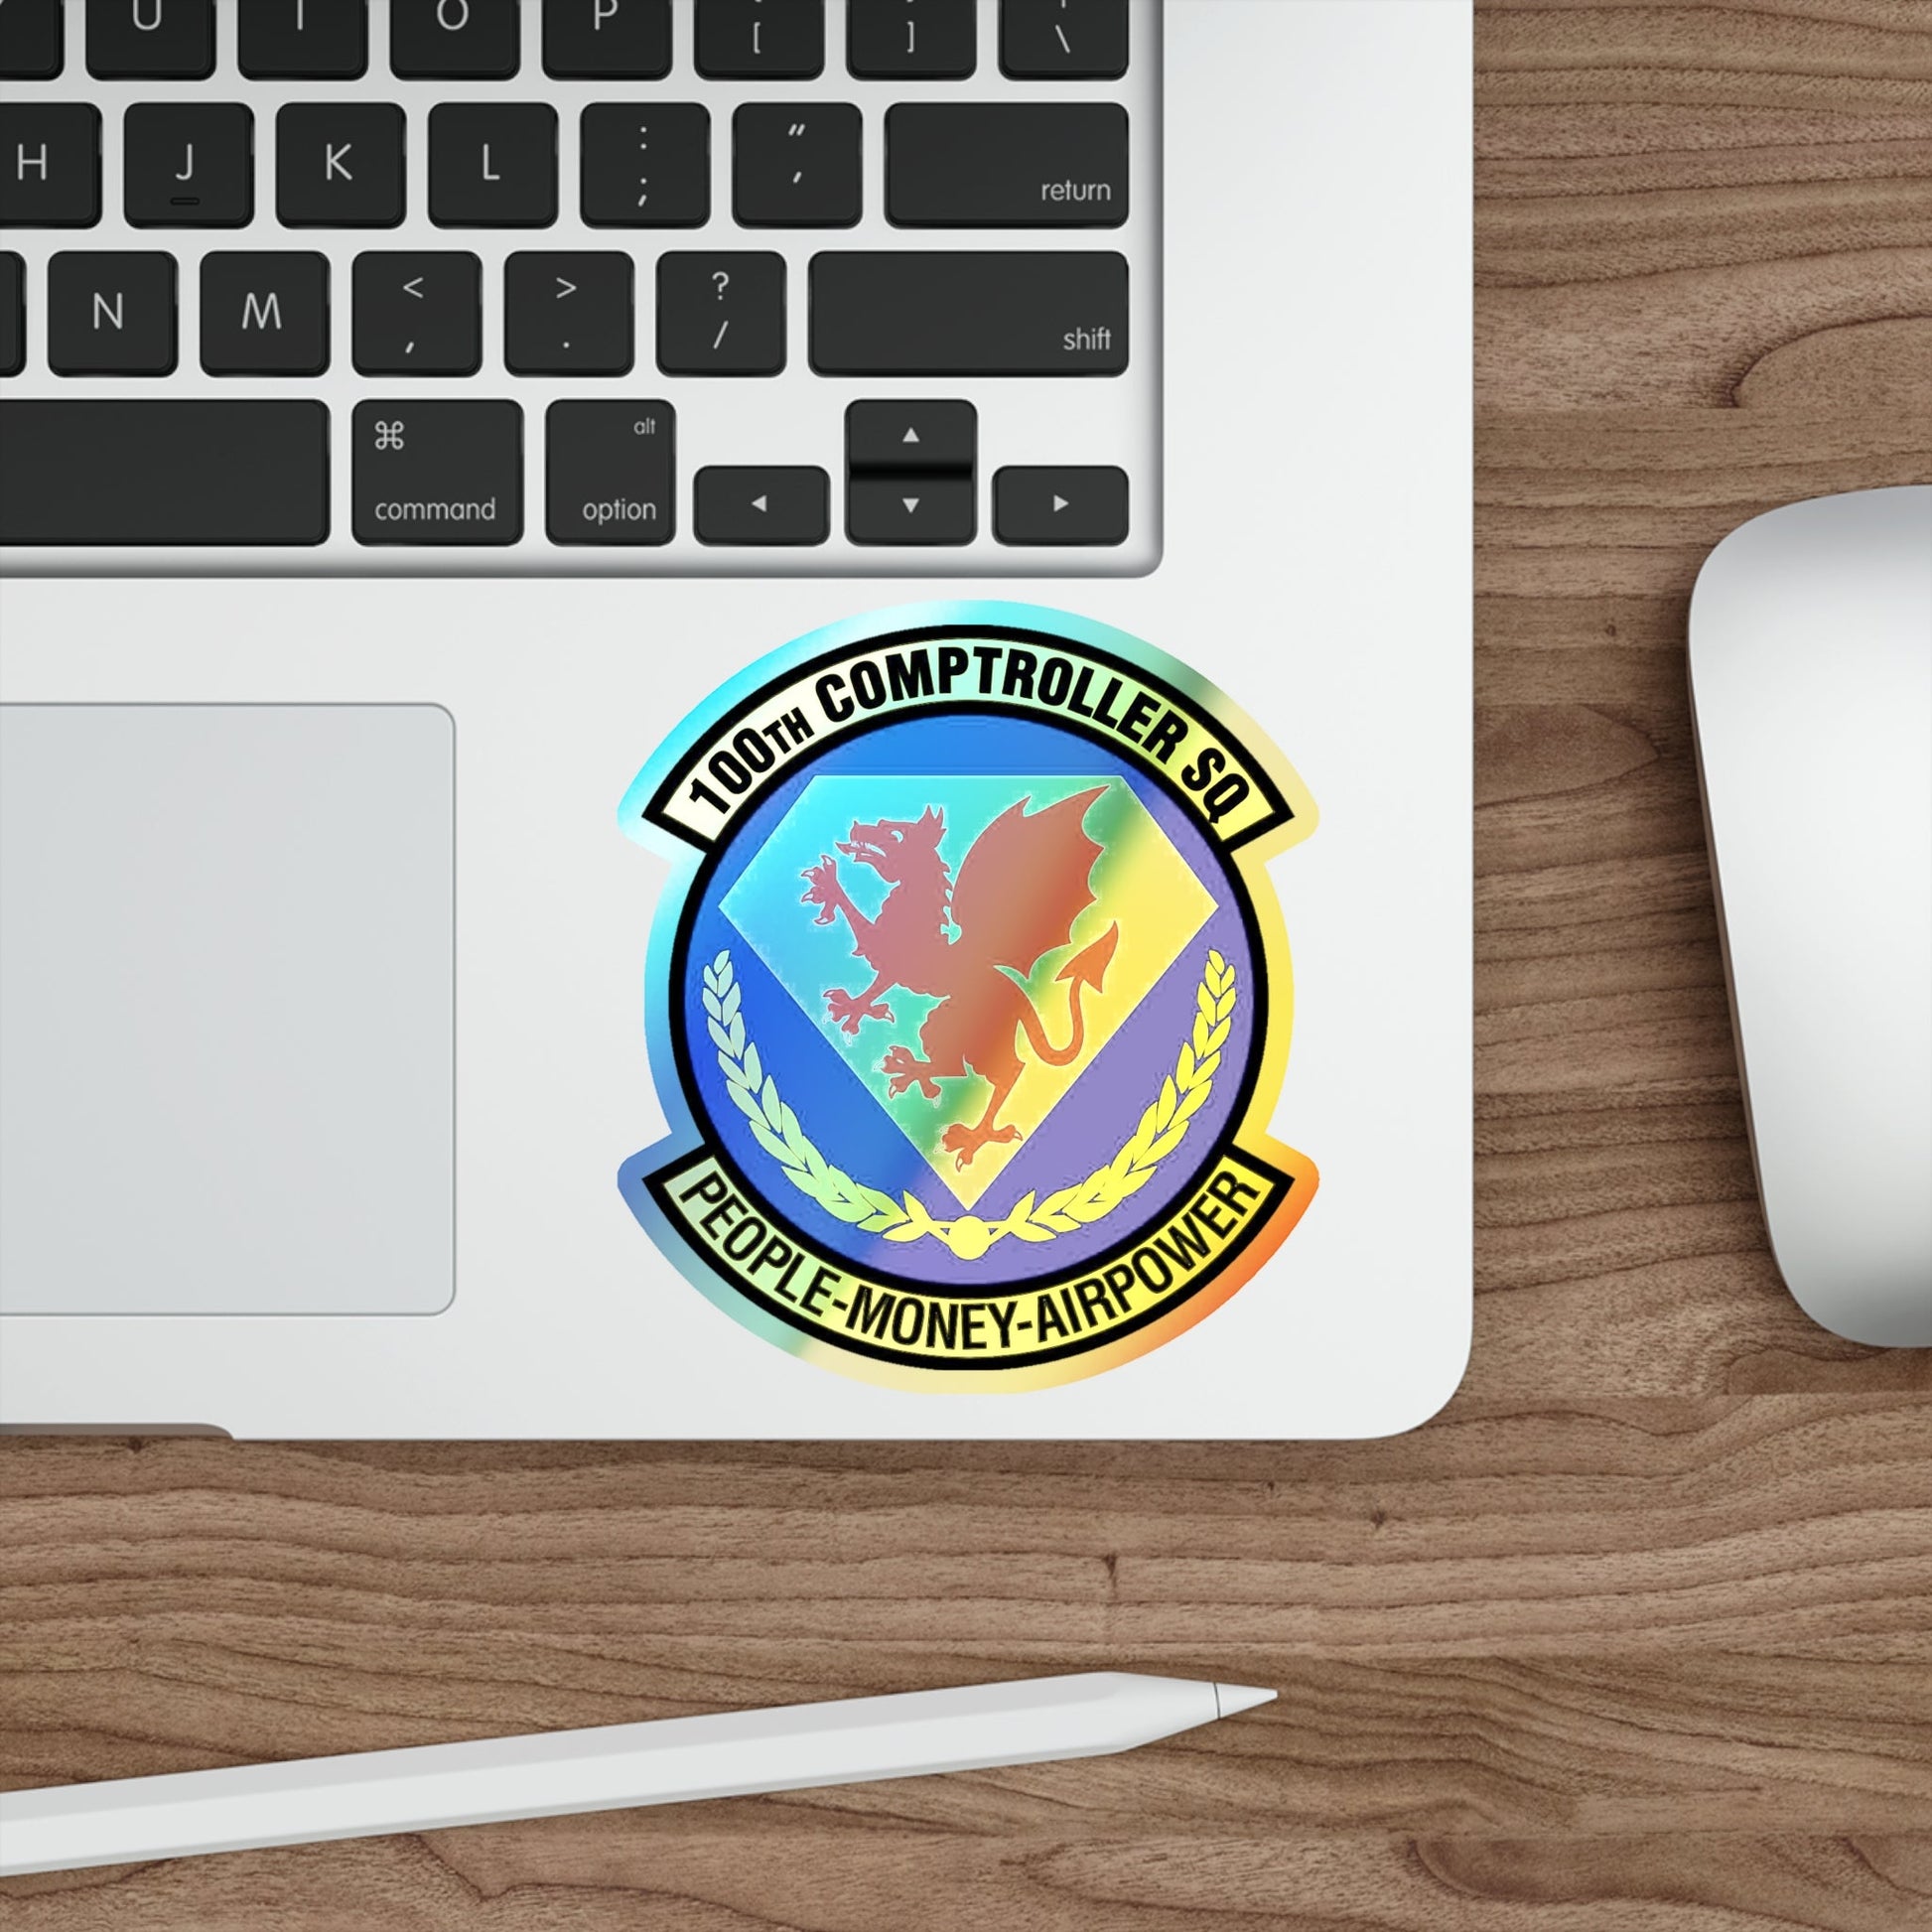 100 Comptroller Squadron USAFE (U.S. Air Force) Holographic STICKER Die-Cut Vinyl Decal-The Sticker Space